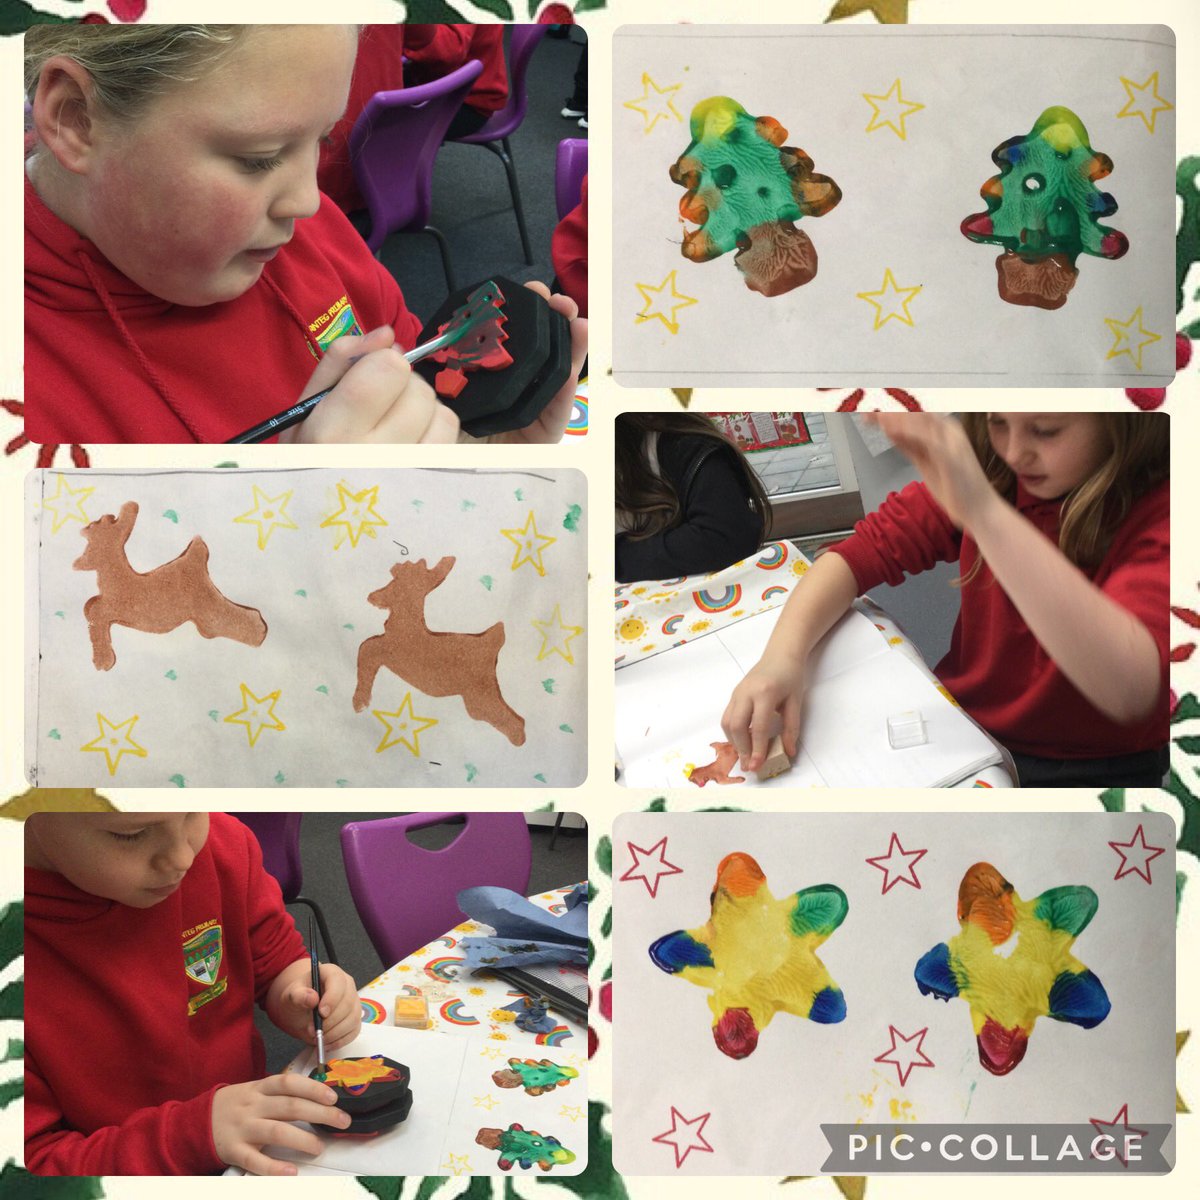 Dosbarth 13 have started to create their Christmas cards today in the style of @EmmaBridgewater using stamping techniques to create different festive patterns🌟🎄🦌 @garntegprimary @MrsSParkerEvans